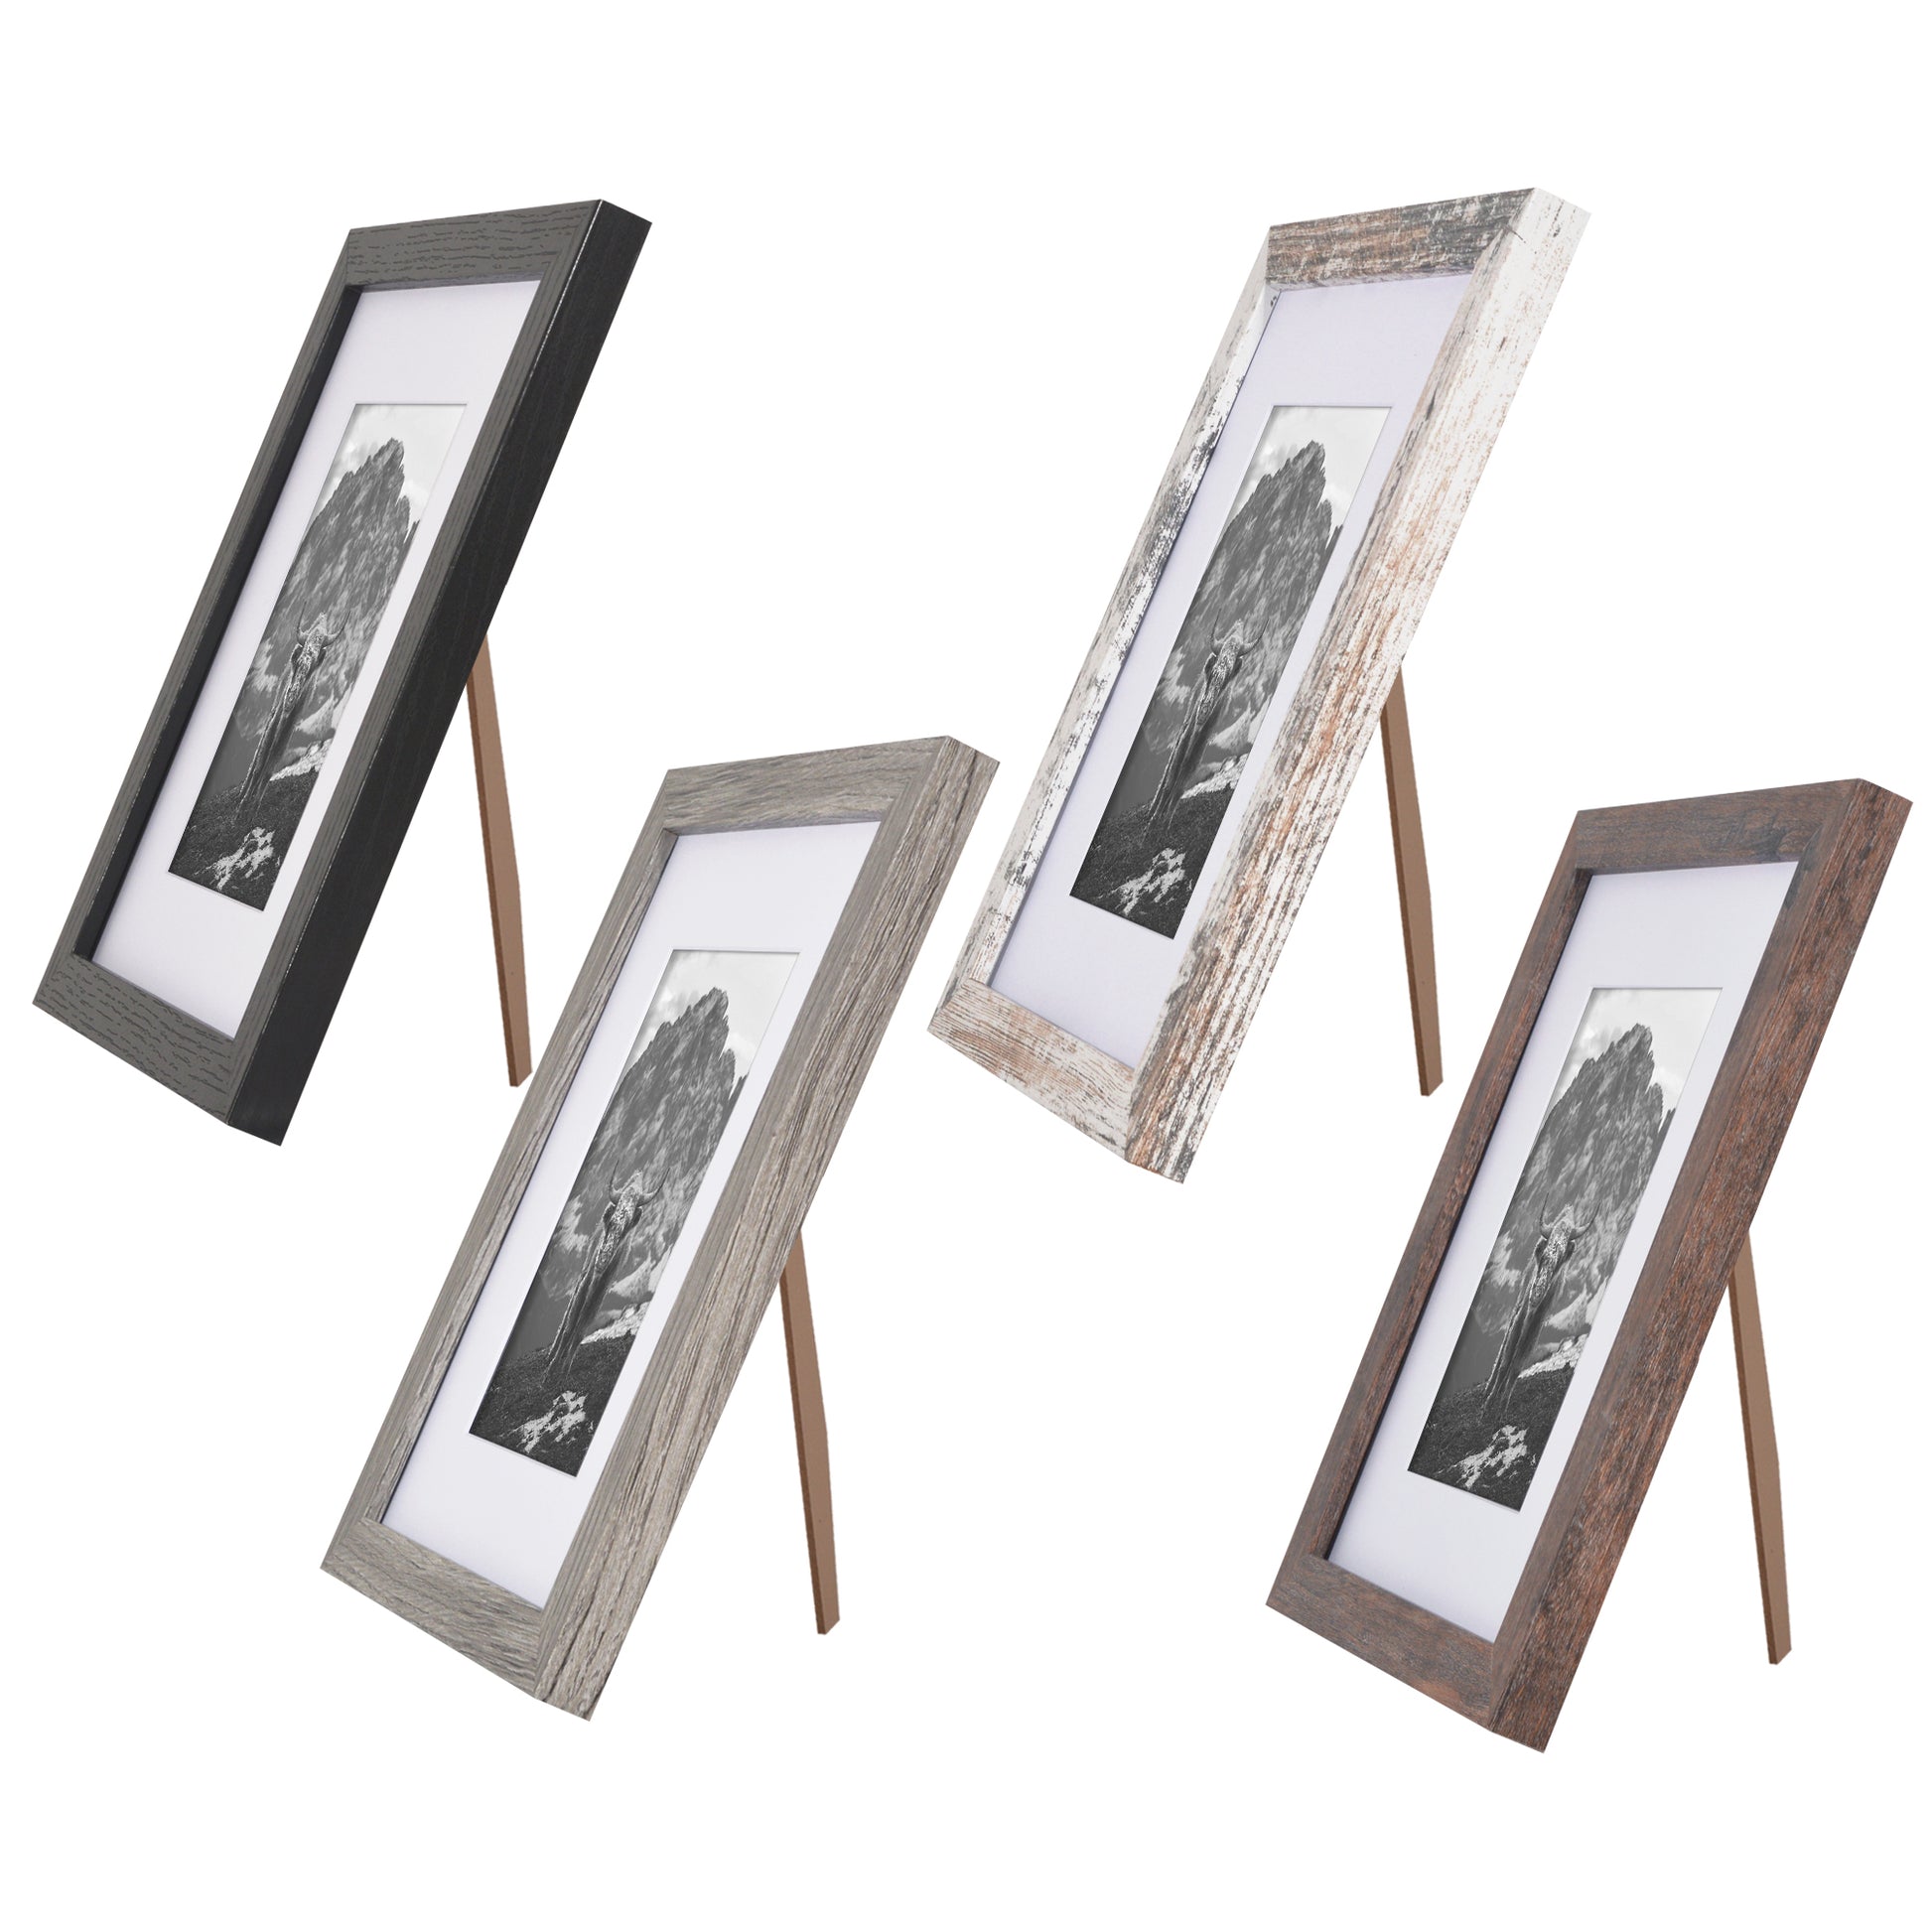 Americanflat Rustic 5x7 Picture Frame Set of 4 - Use As 4x6 Picture Frame with Mat or 5x7 Frame Without Mat - Photo Frame with Textured Engineered